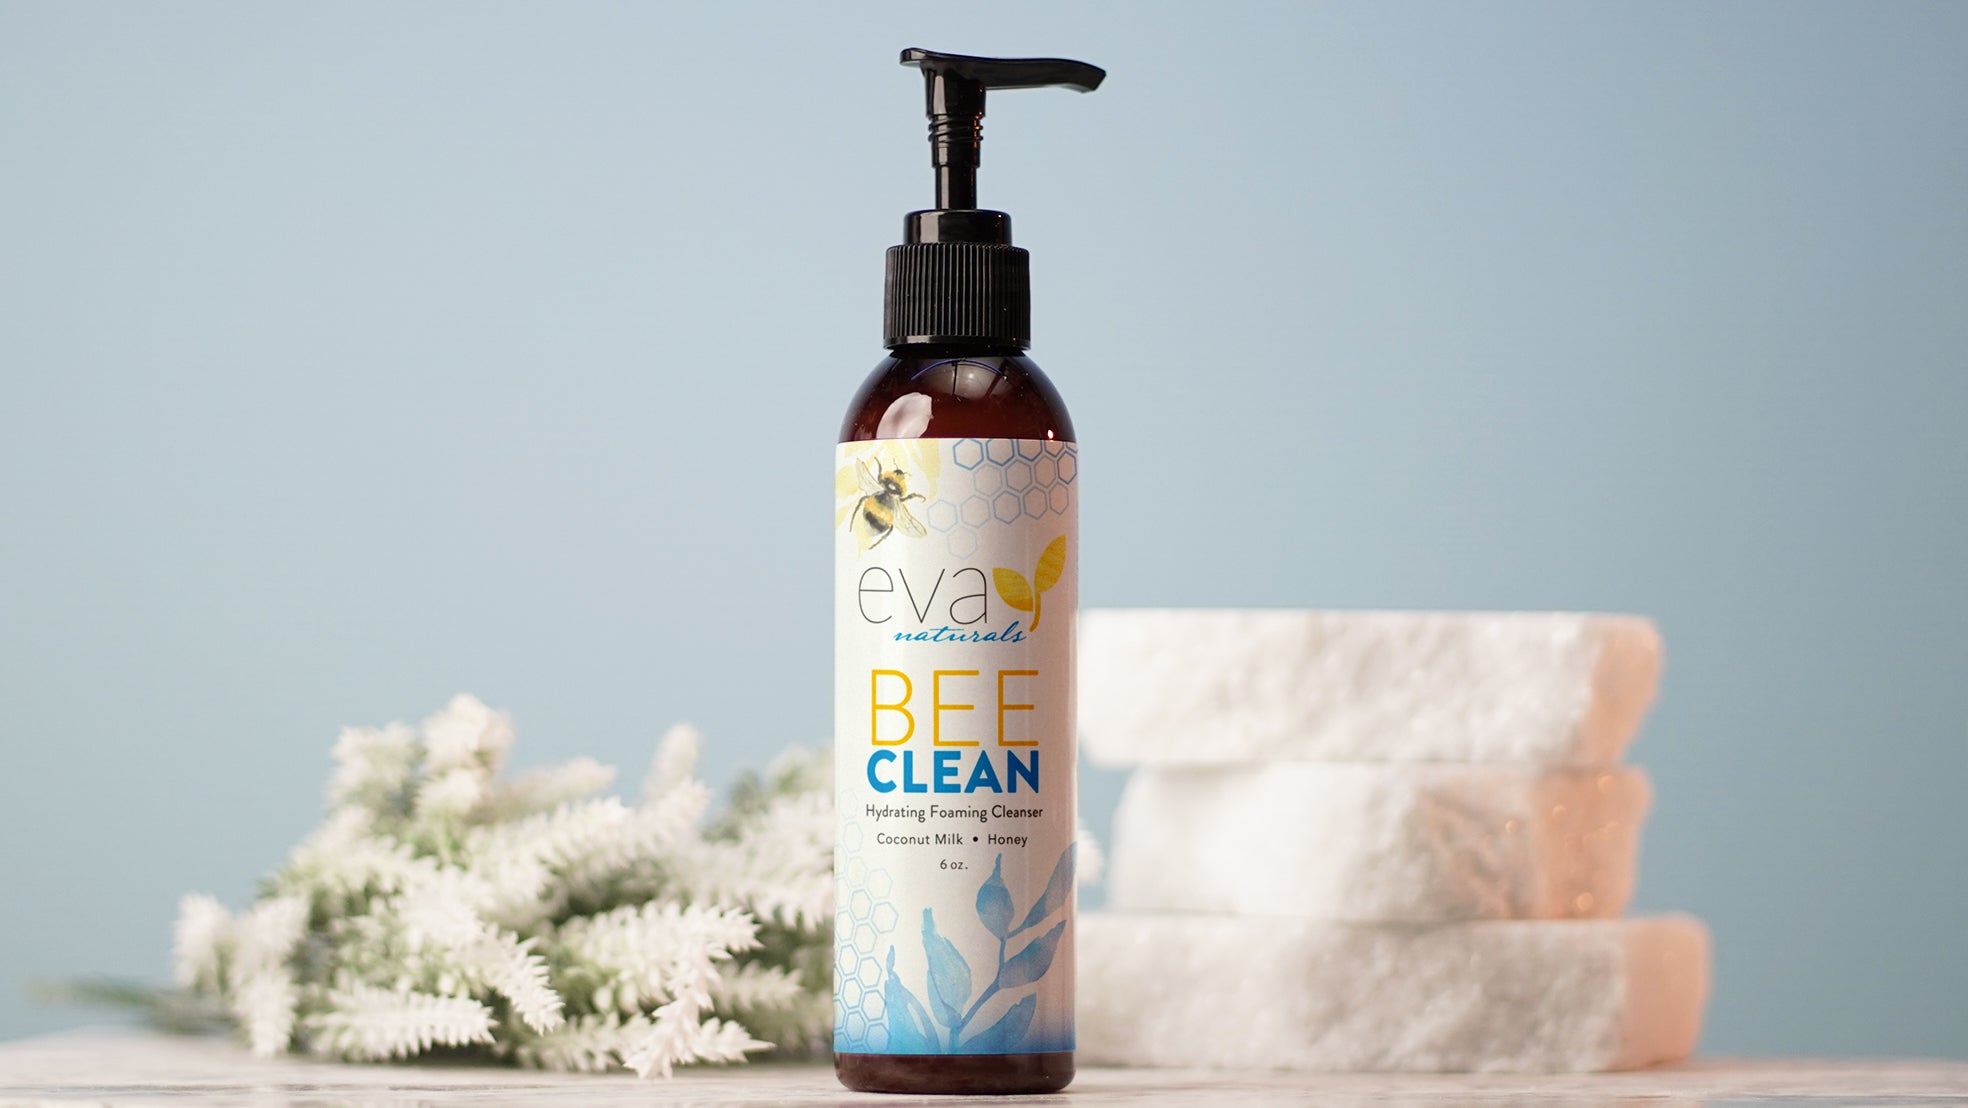 A Deeply Moisturizing Daily Face Wash - Be Clean With Bee Clean Foaming Cleanser